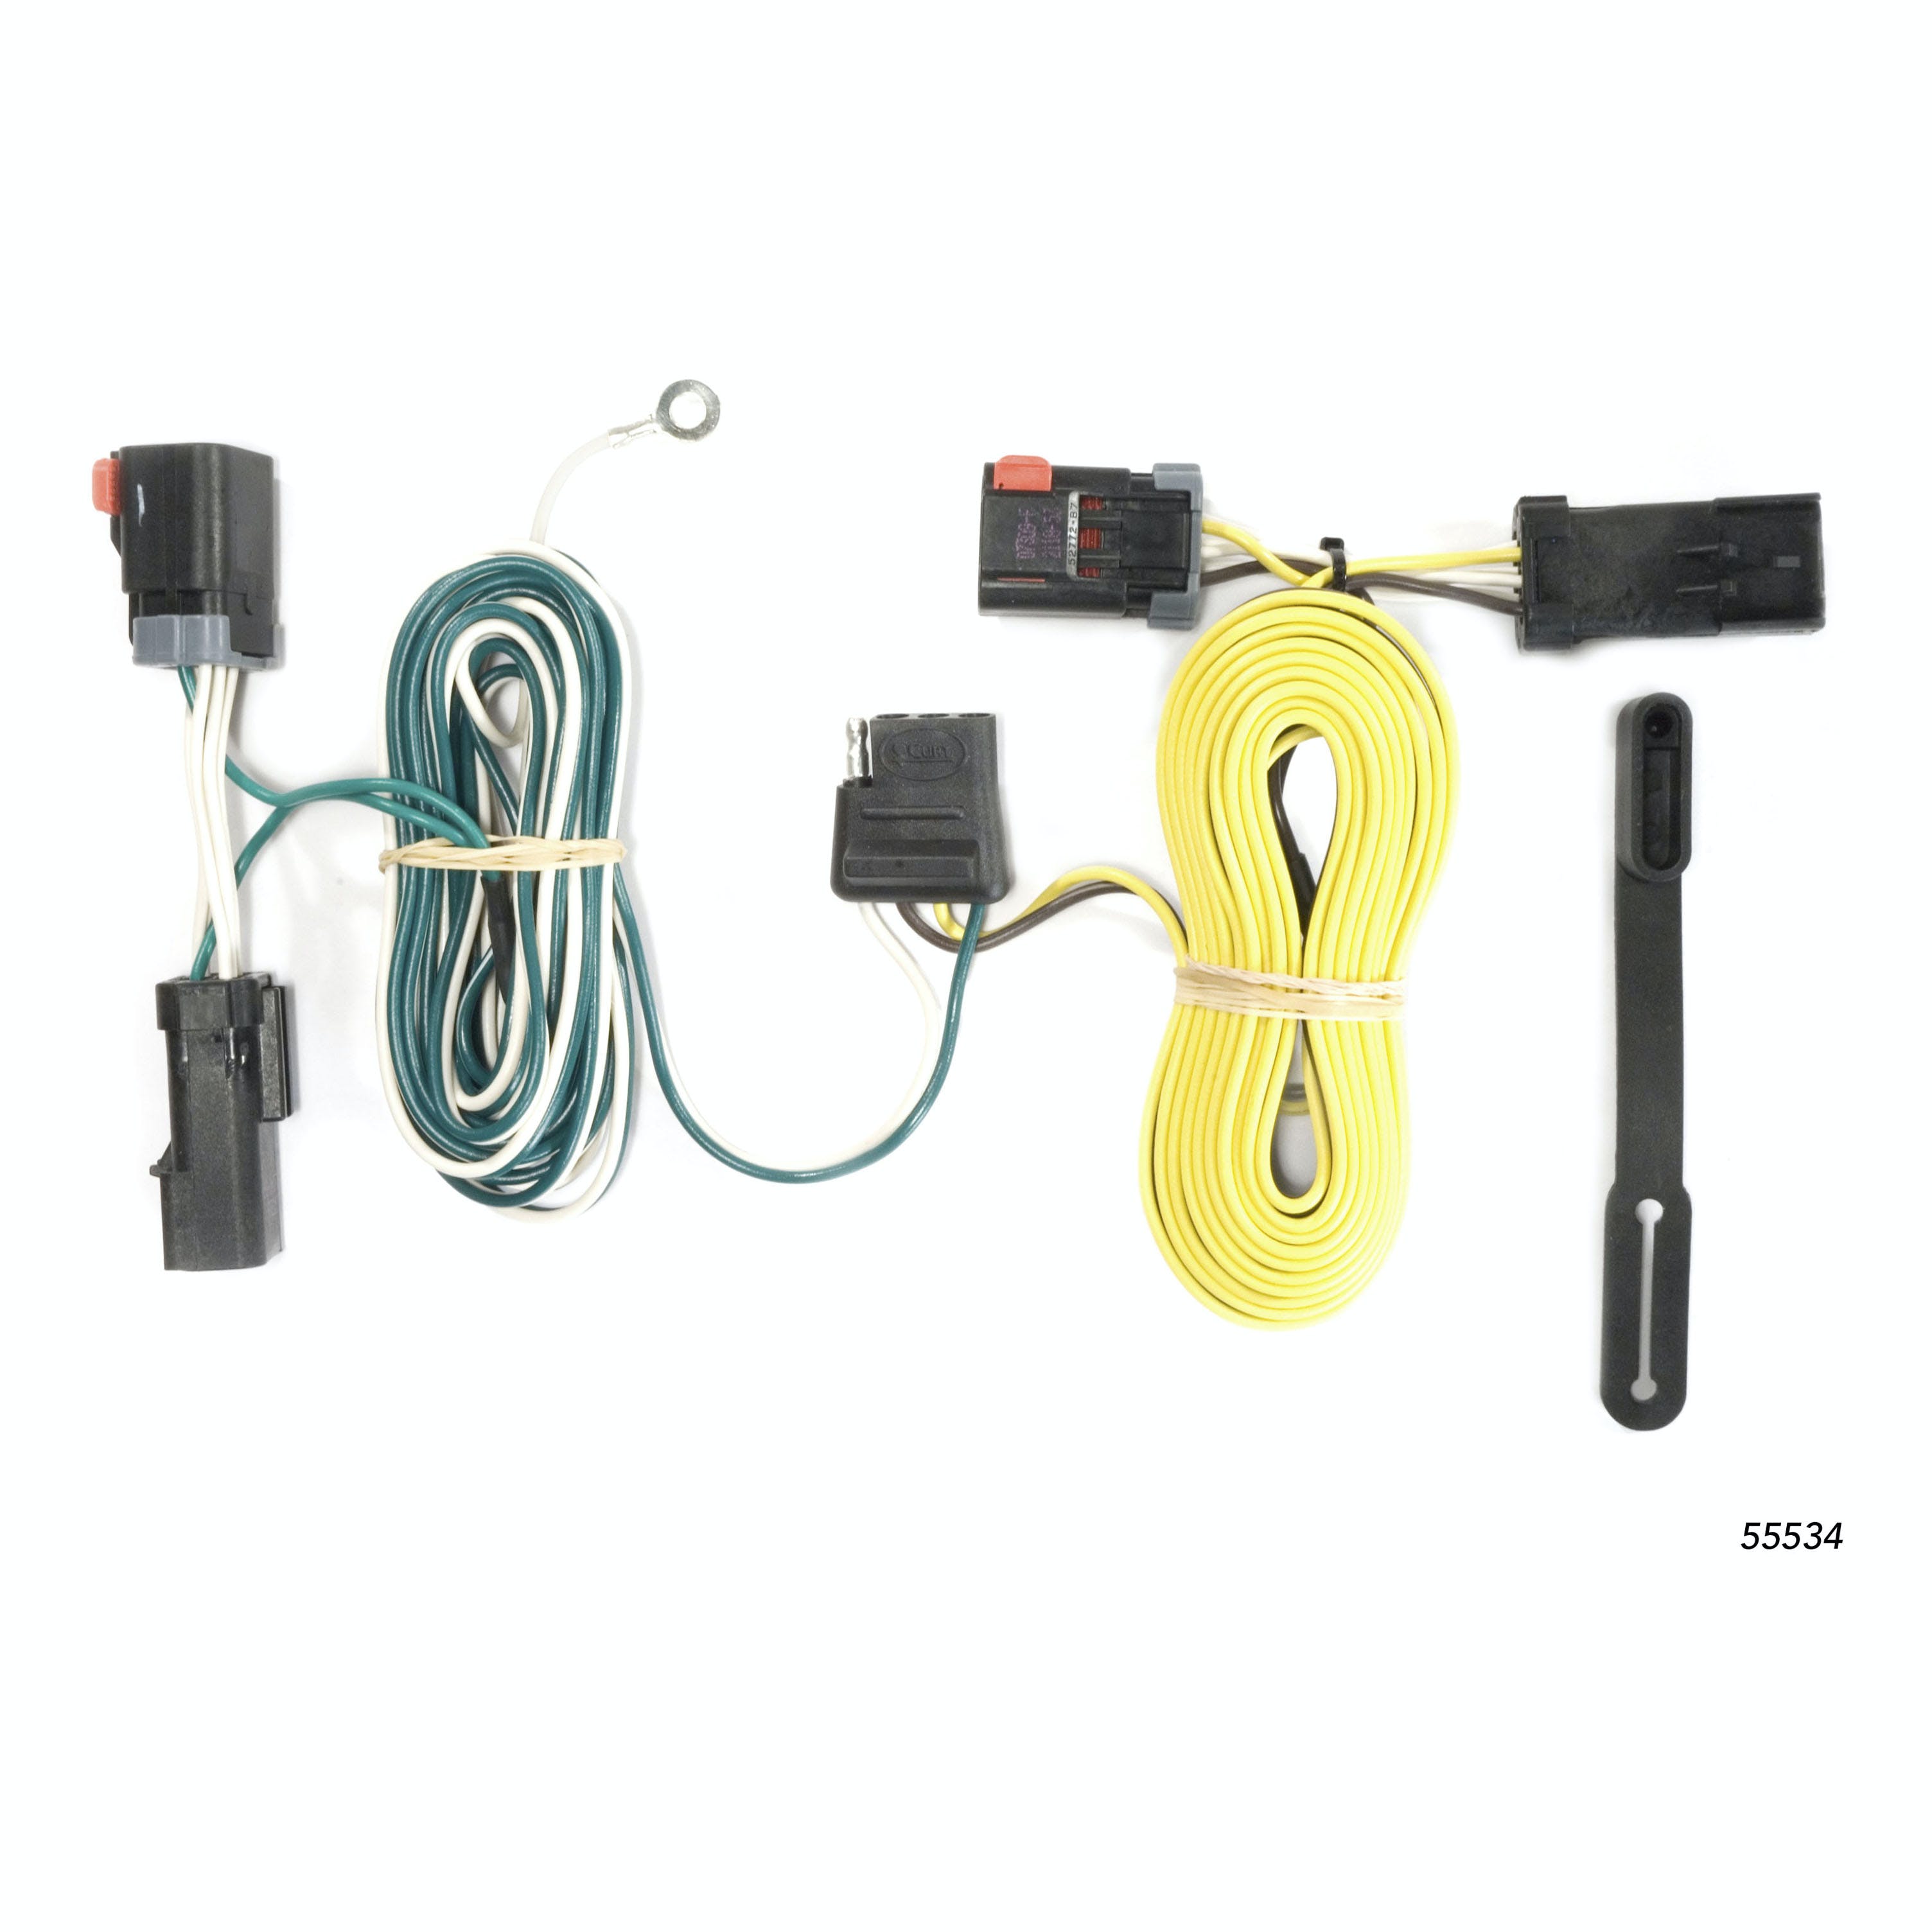 CURT 55534 Custom Wiring, 4-Way Flat Output, Select Chrysler 300, Dodge Charger, Challenger